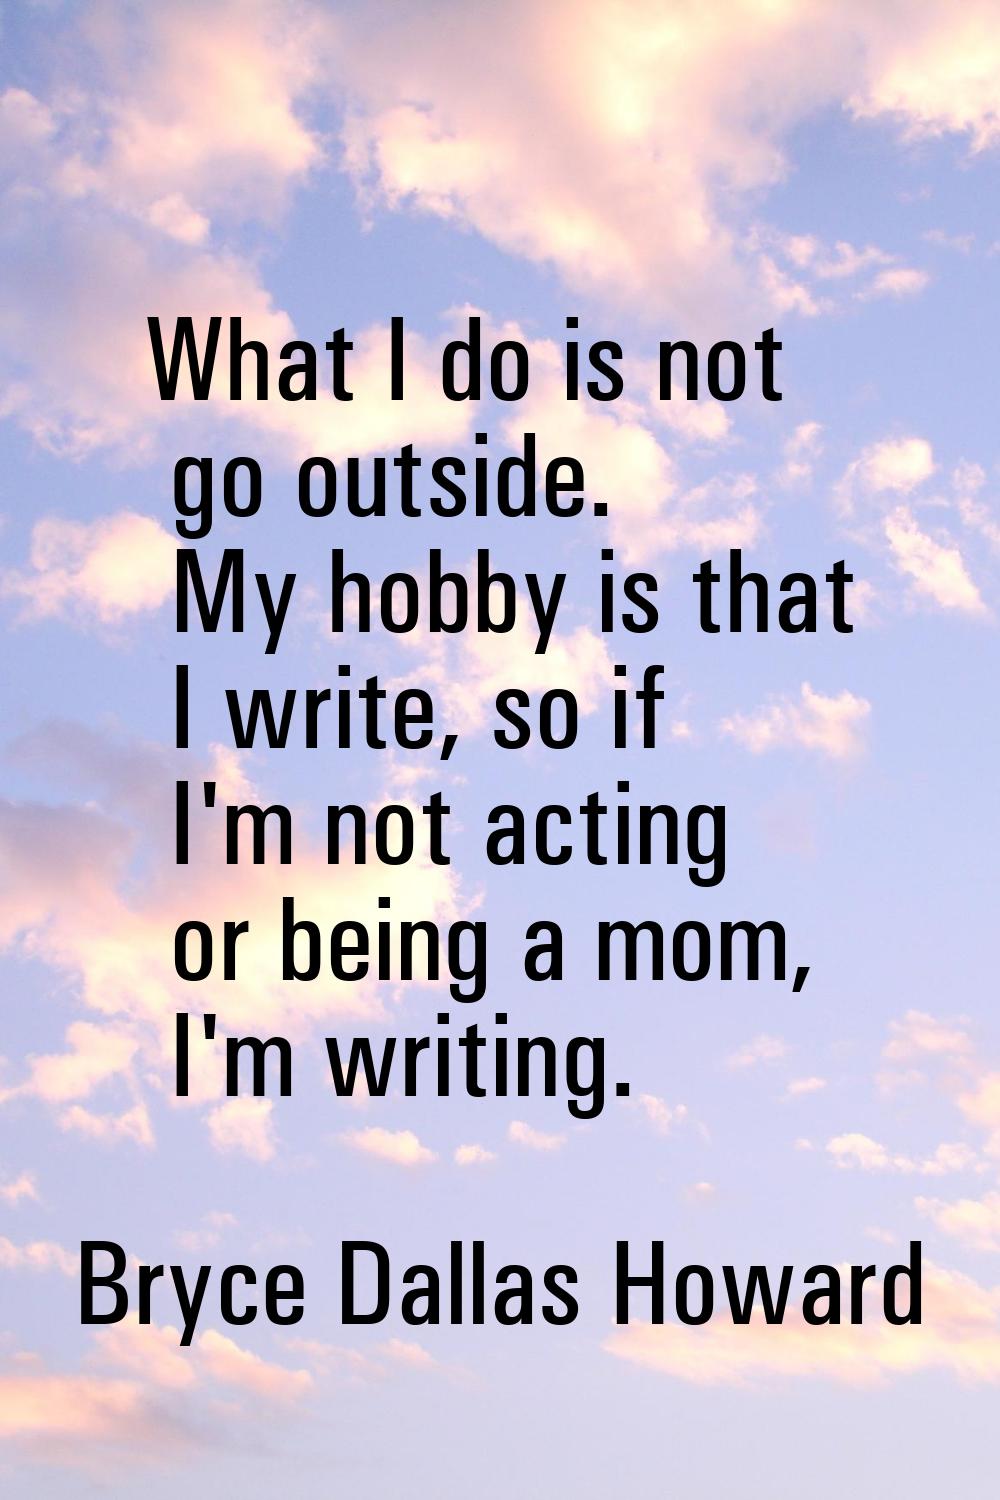 What I do is not go outside. My hobby is that I write, so if I'm not acting or being a mom, I'm wri